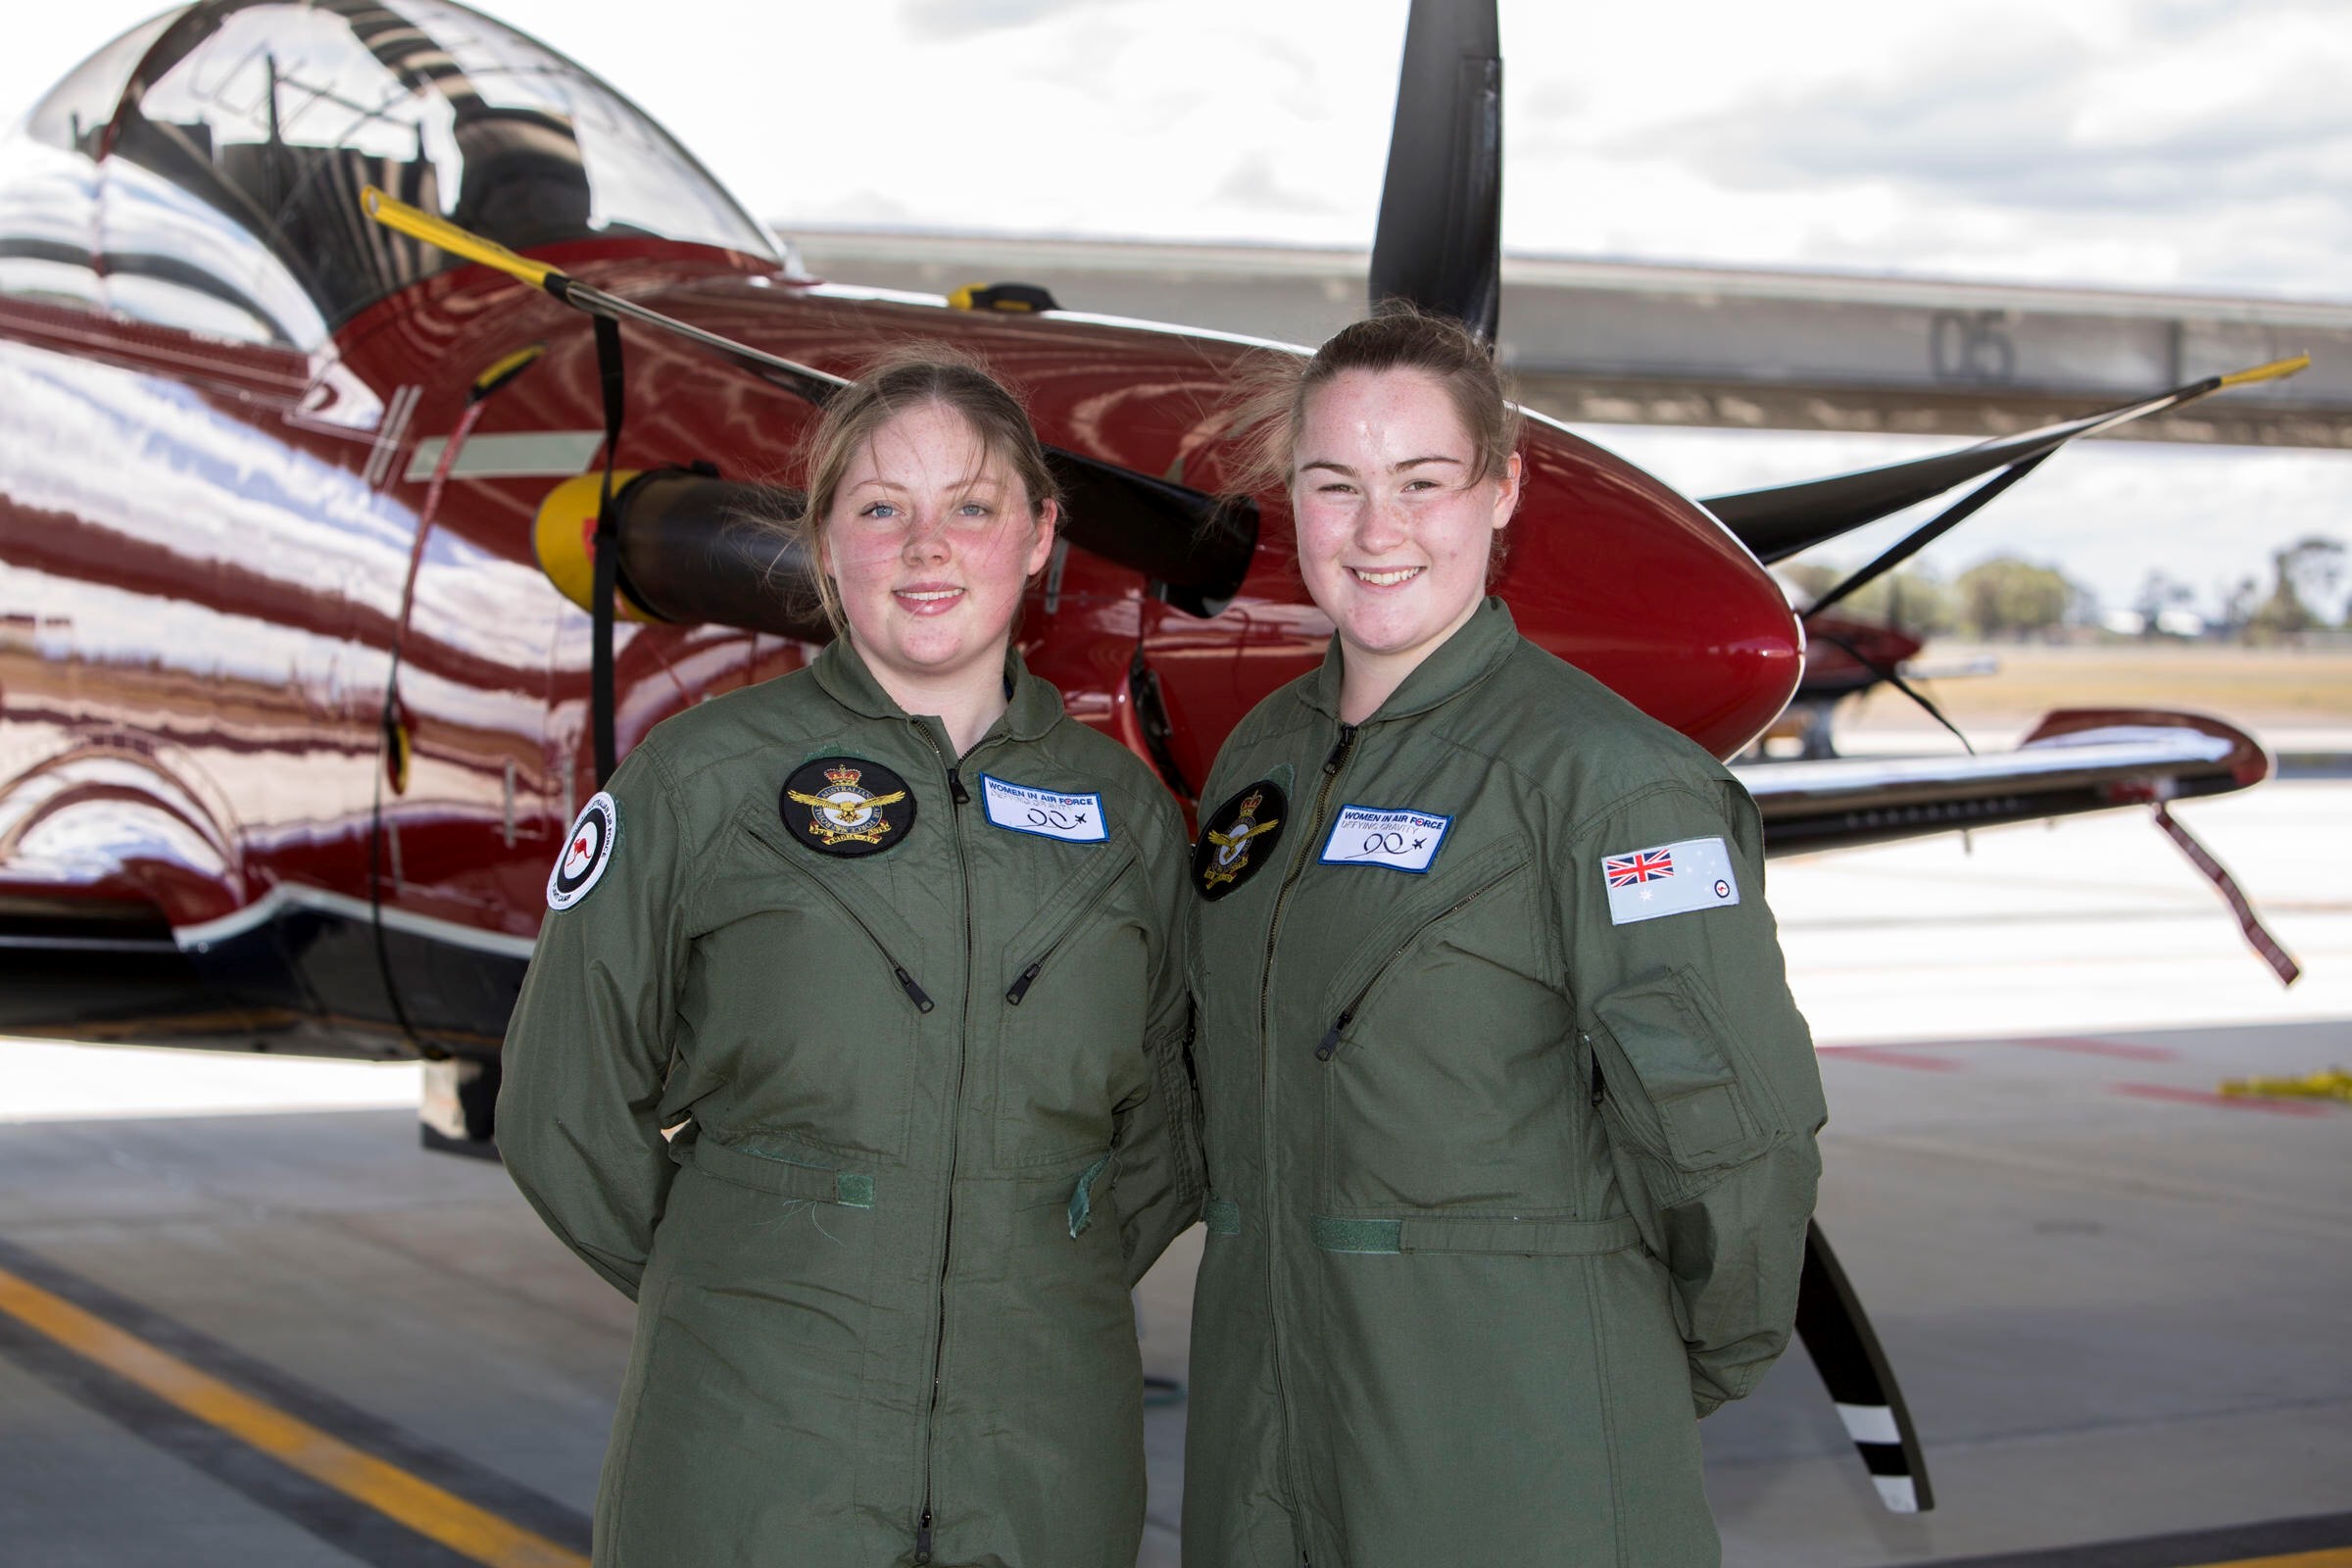 Student Reflections - Women in Aviation Camp | Merici News: Building Futures